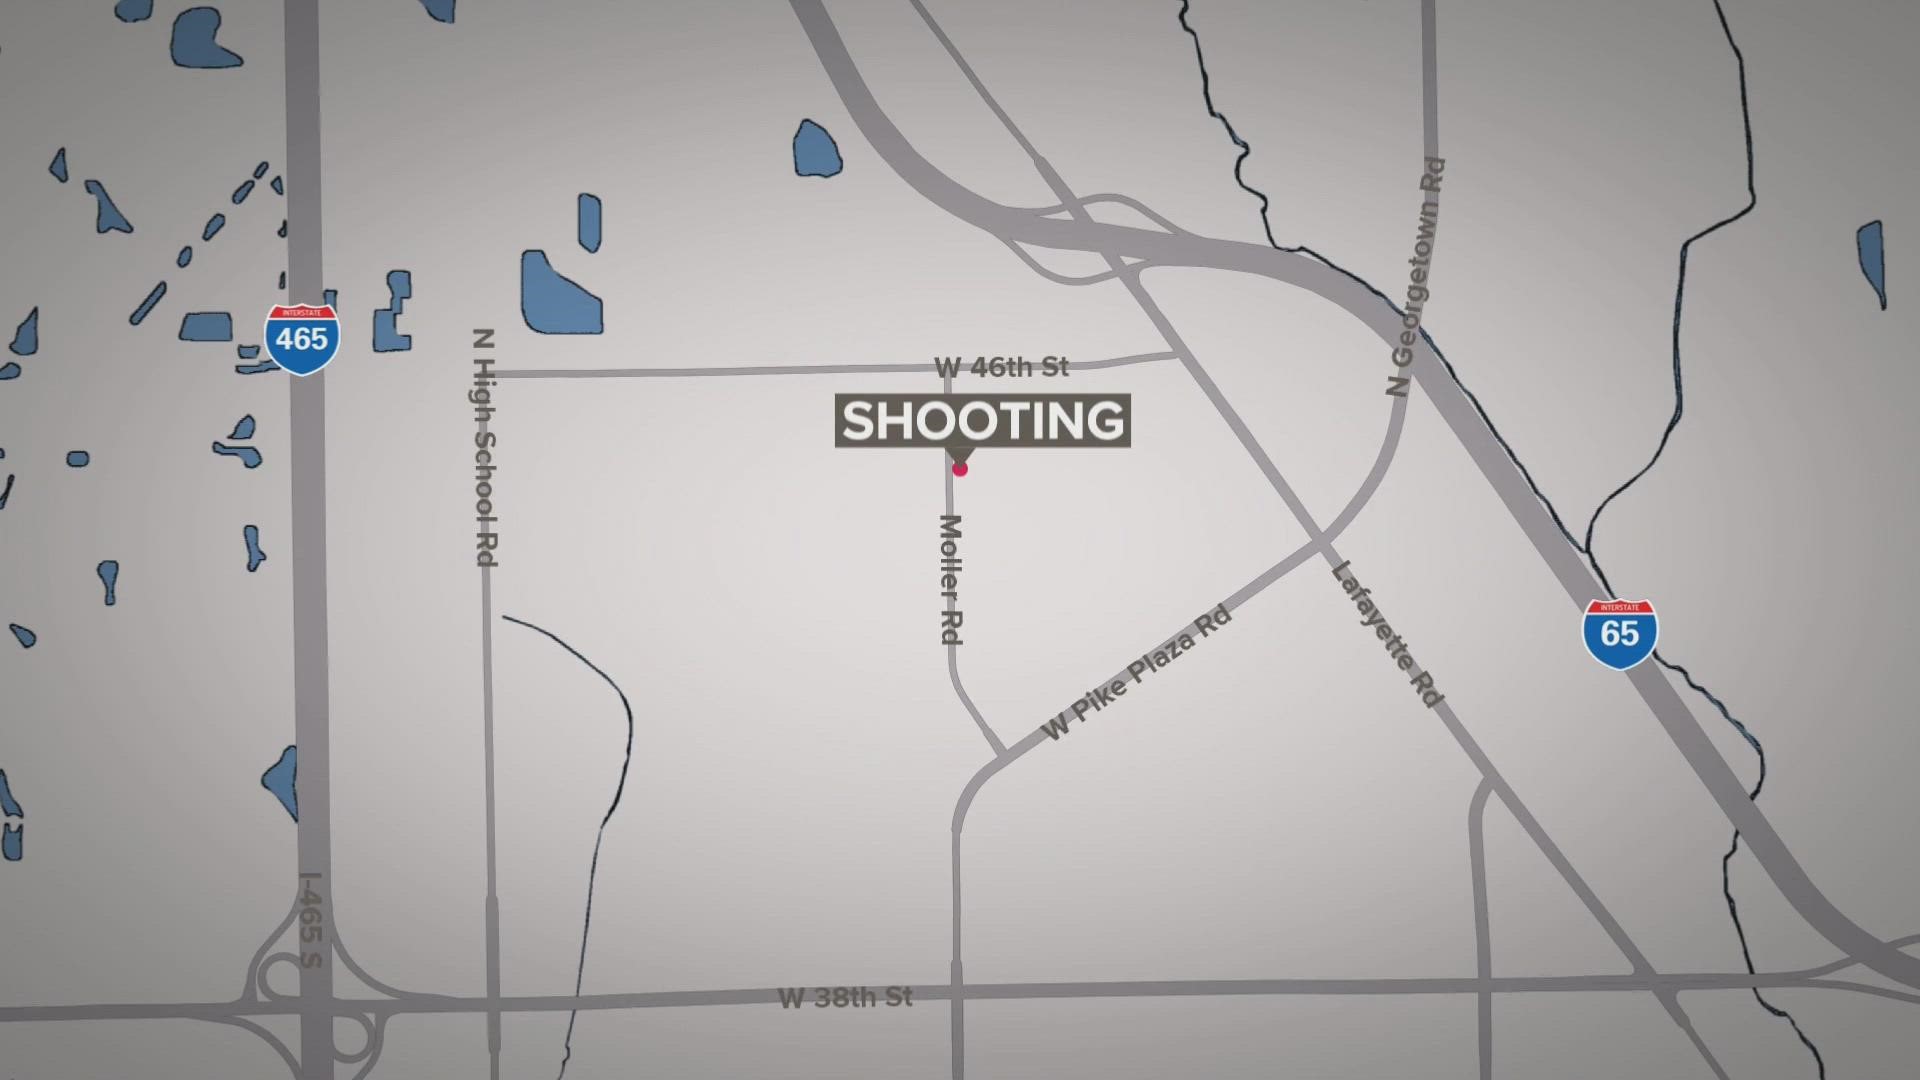 IMPD was called to investigate a person shot around 1 a.m. Saturday in the 4400 block of Fullwood Court.